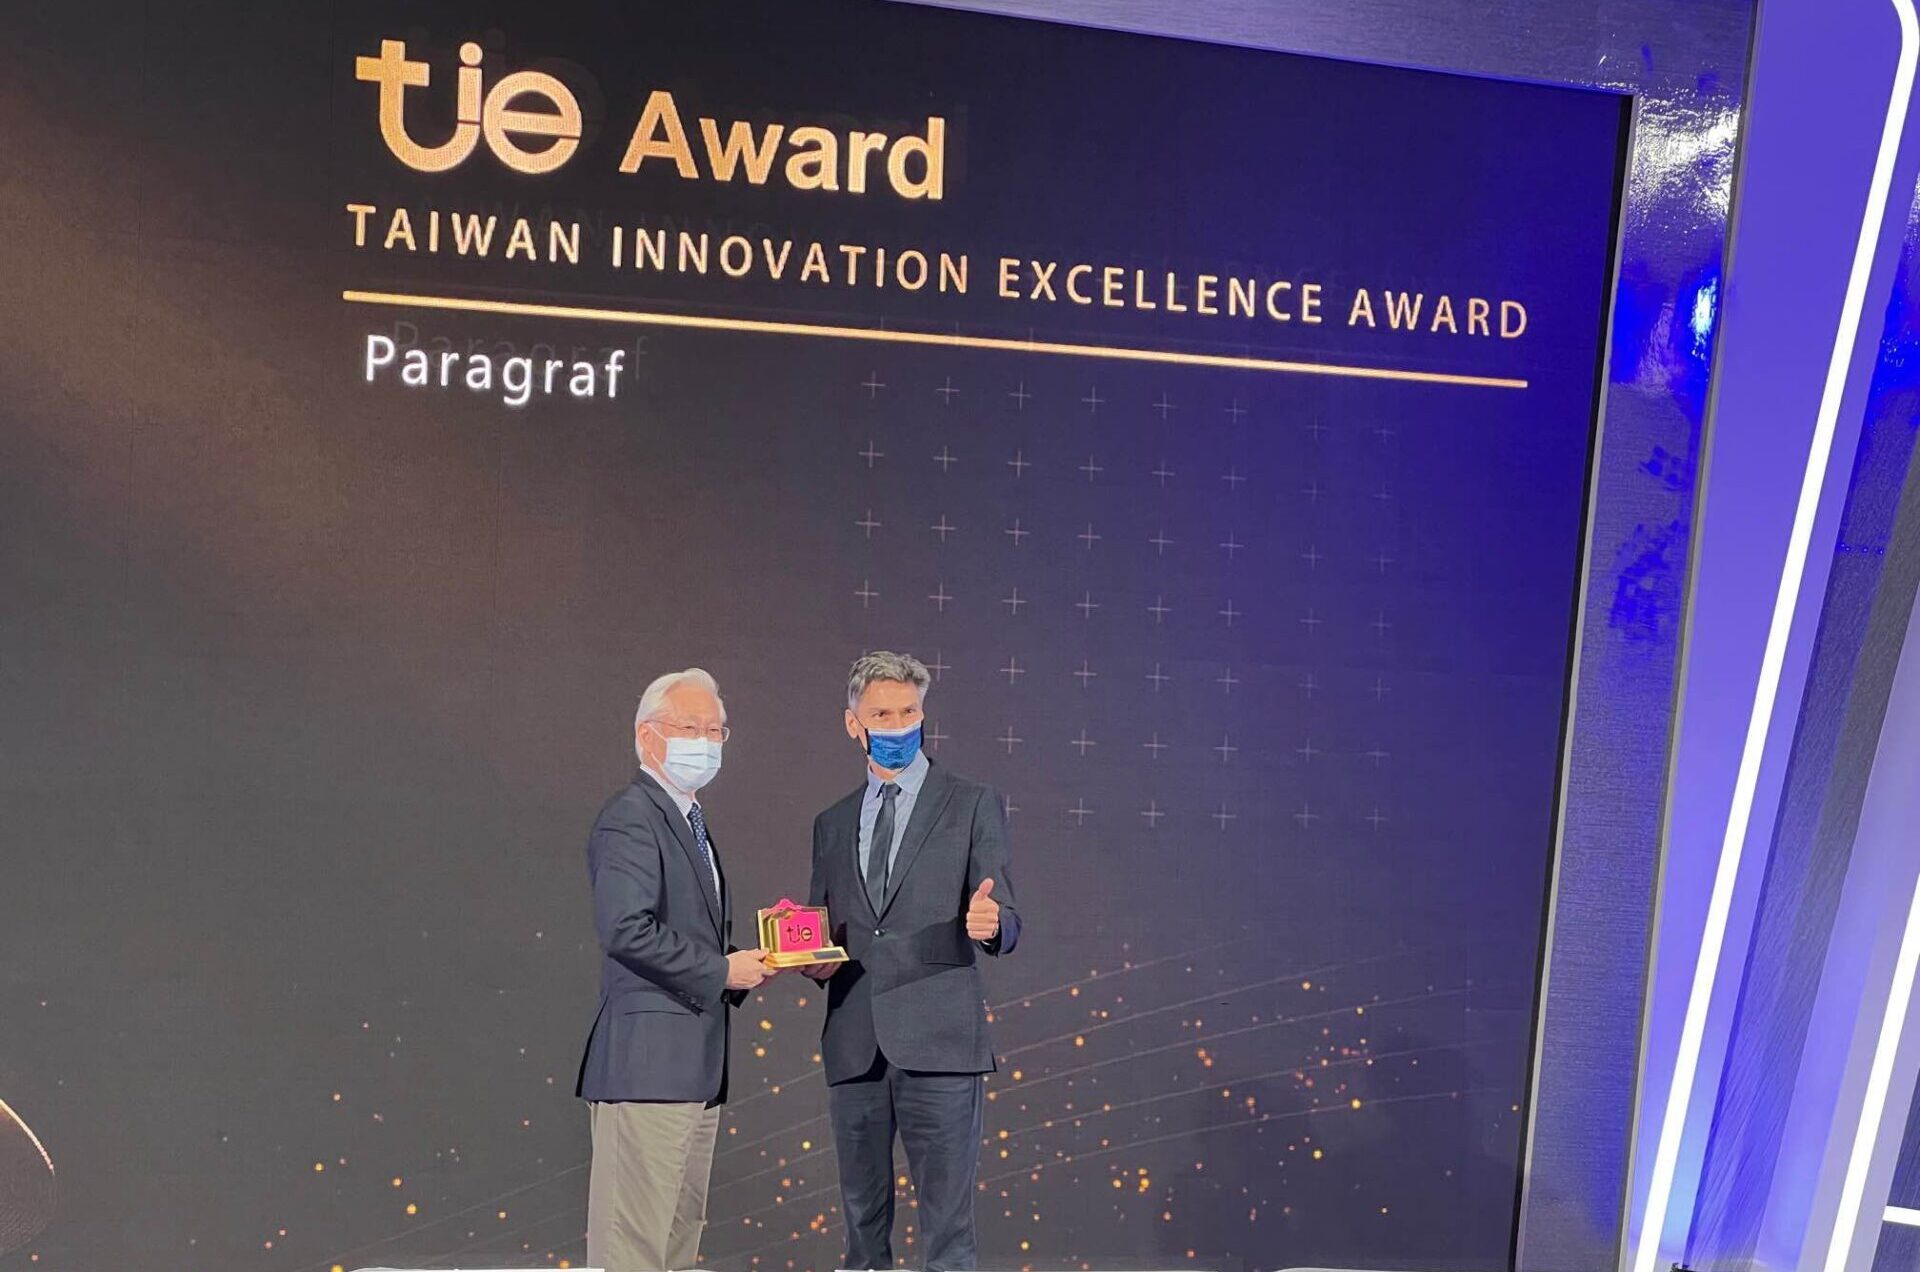 Paragraf CCO Tom Wilson accepts award from Minister of Science and Technology Mr Tsung-Tsong Wu (吳政忠) at the Tech Innovation Excellence (#tie) Awards in Taiwan